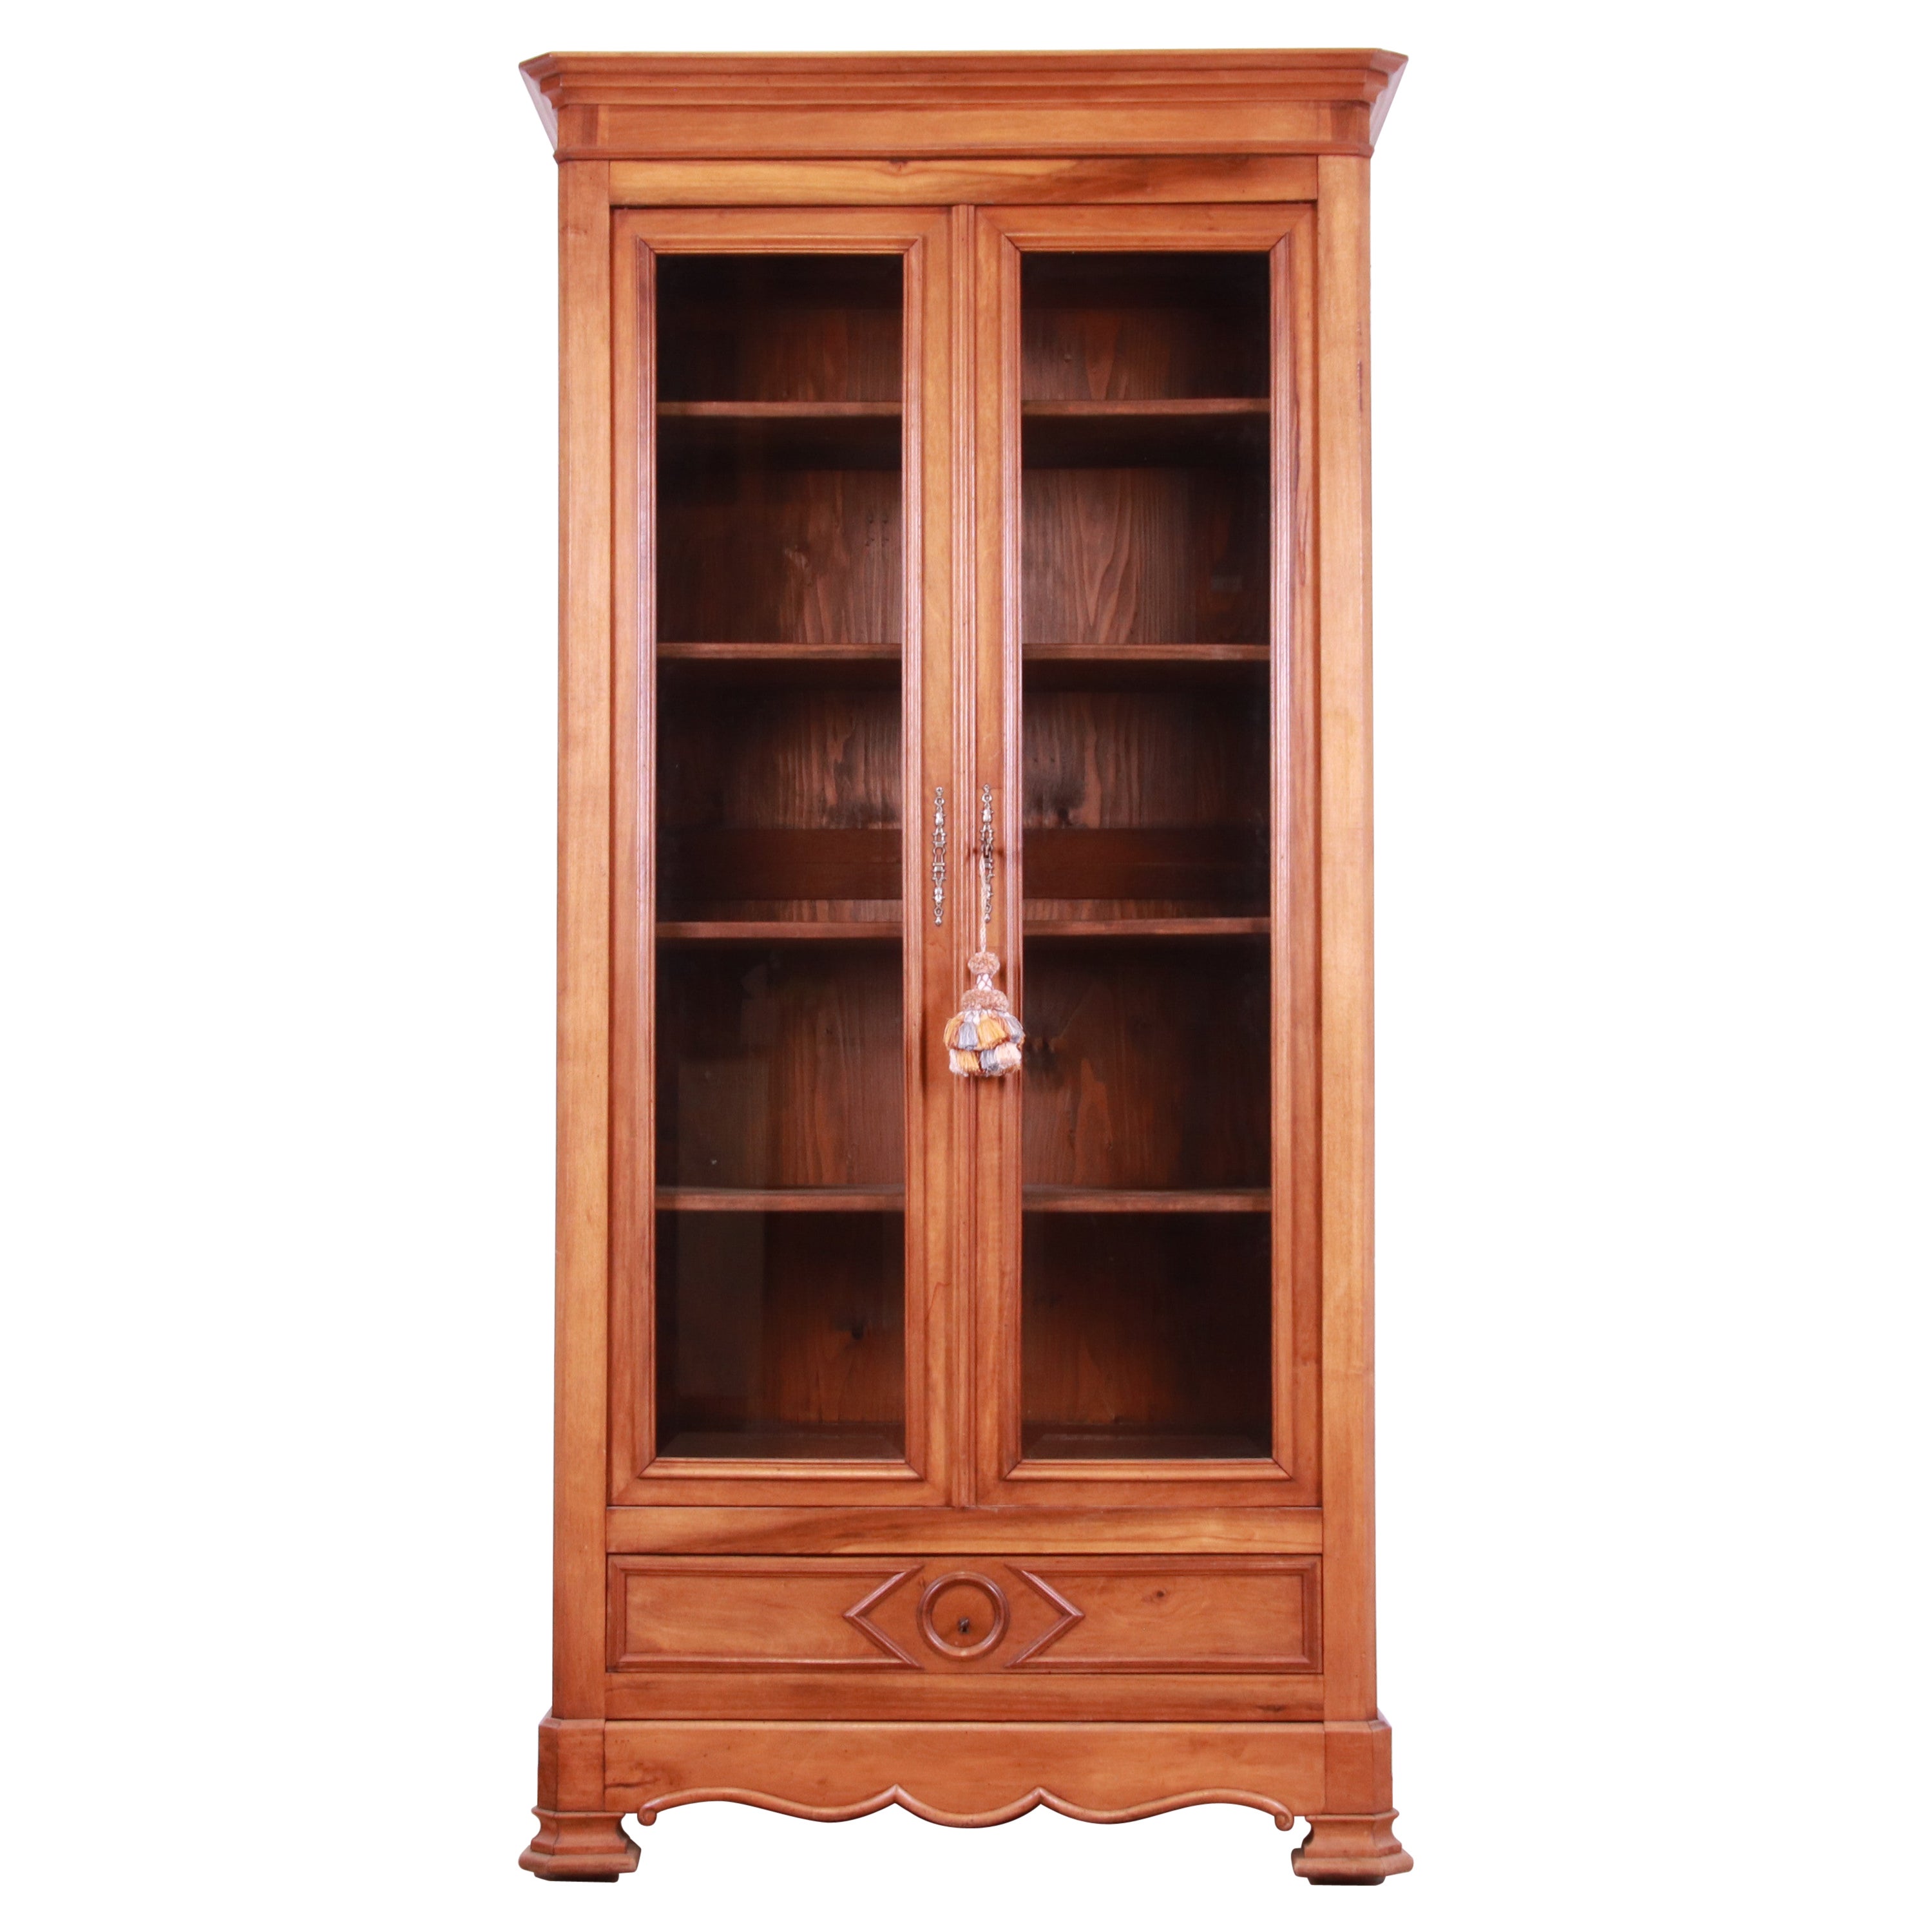 Antique Victorian Carved Walnut Glass Front Bookcase, Circa 1890s For Sale